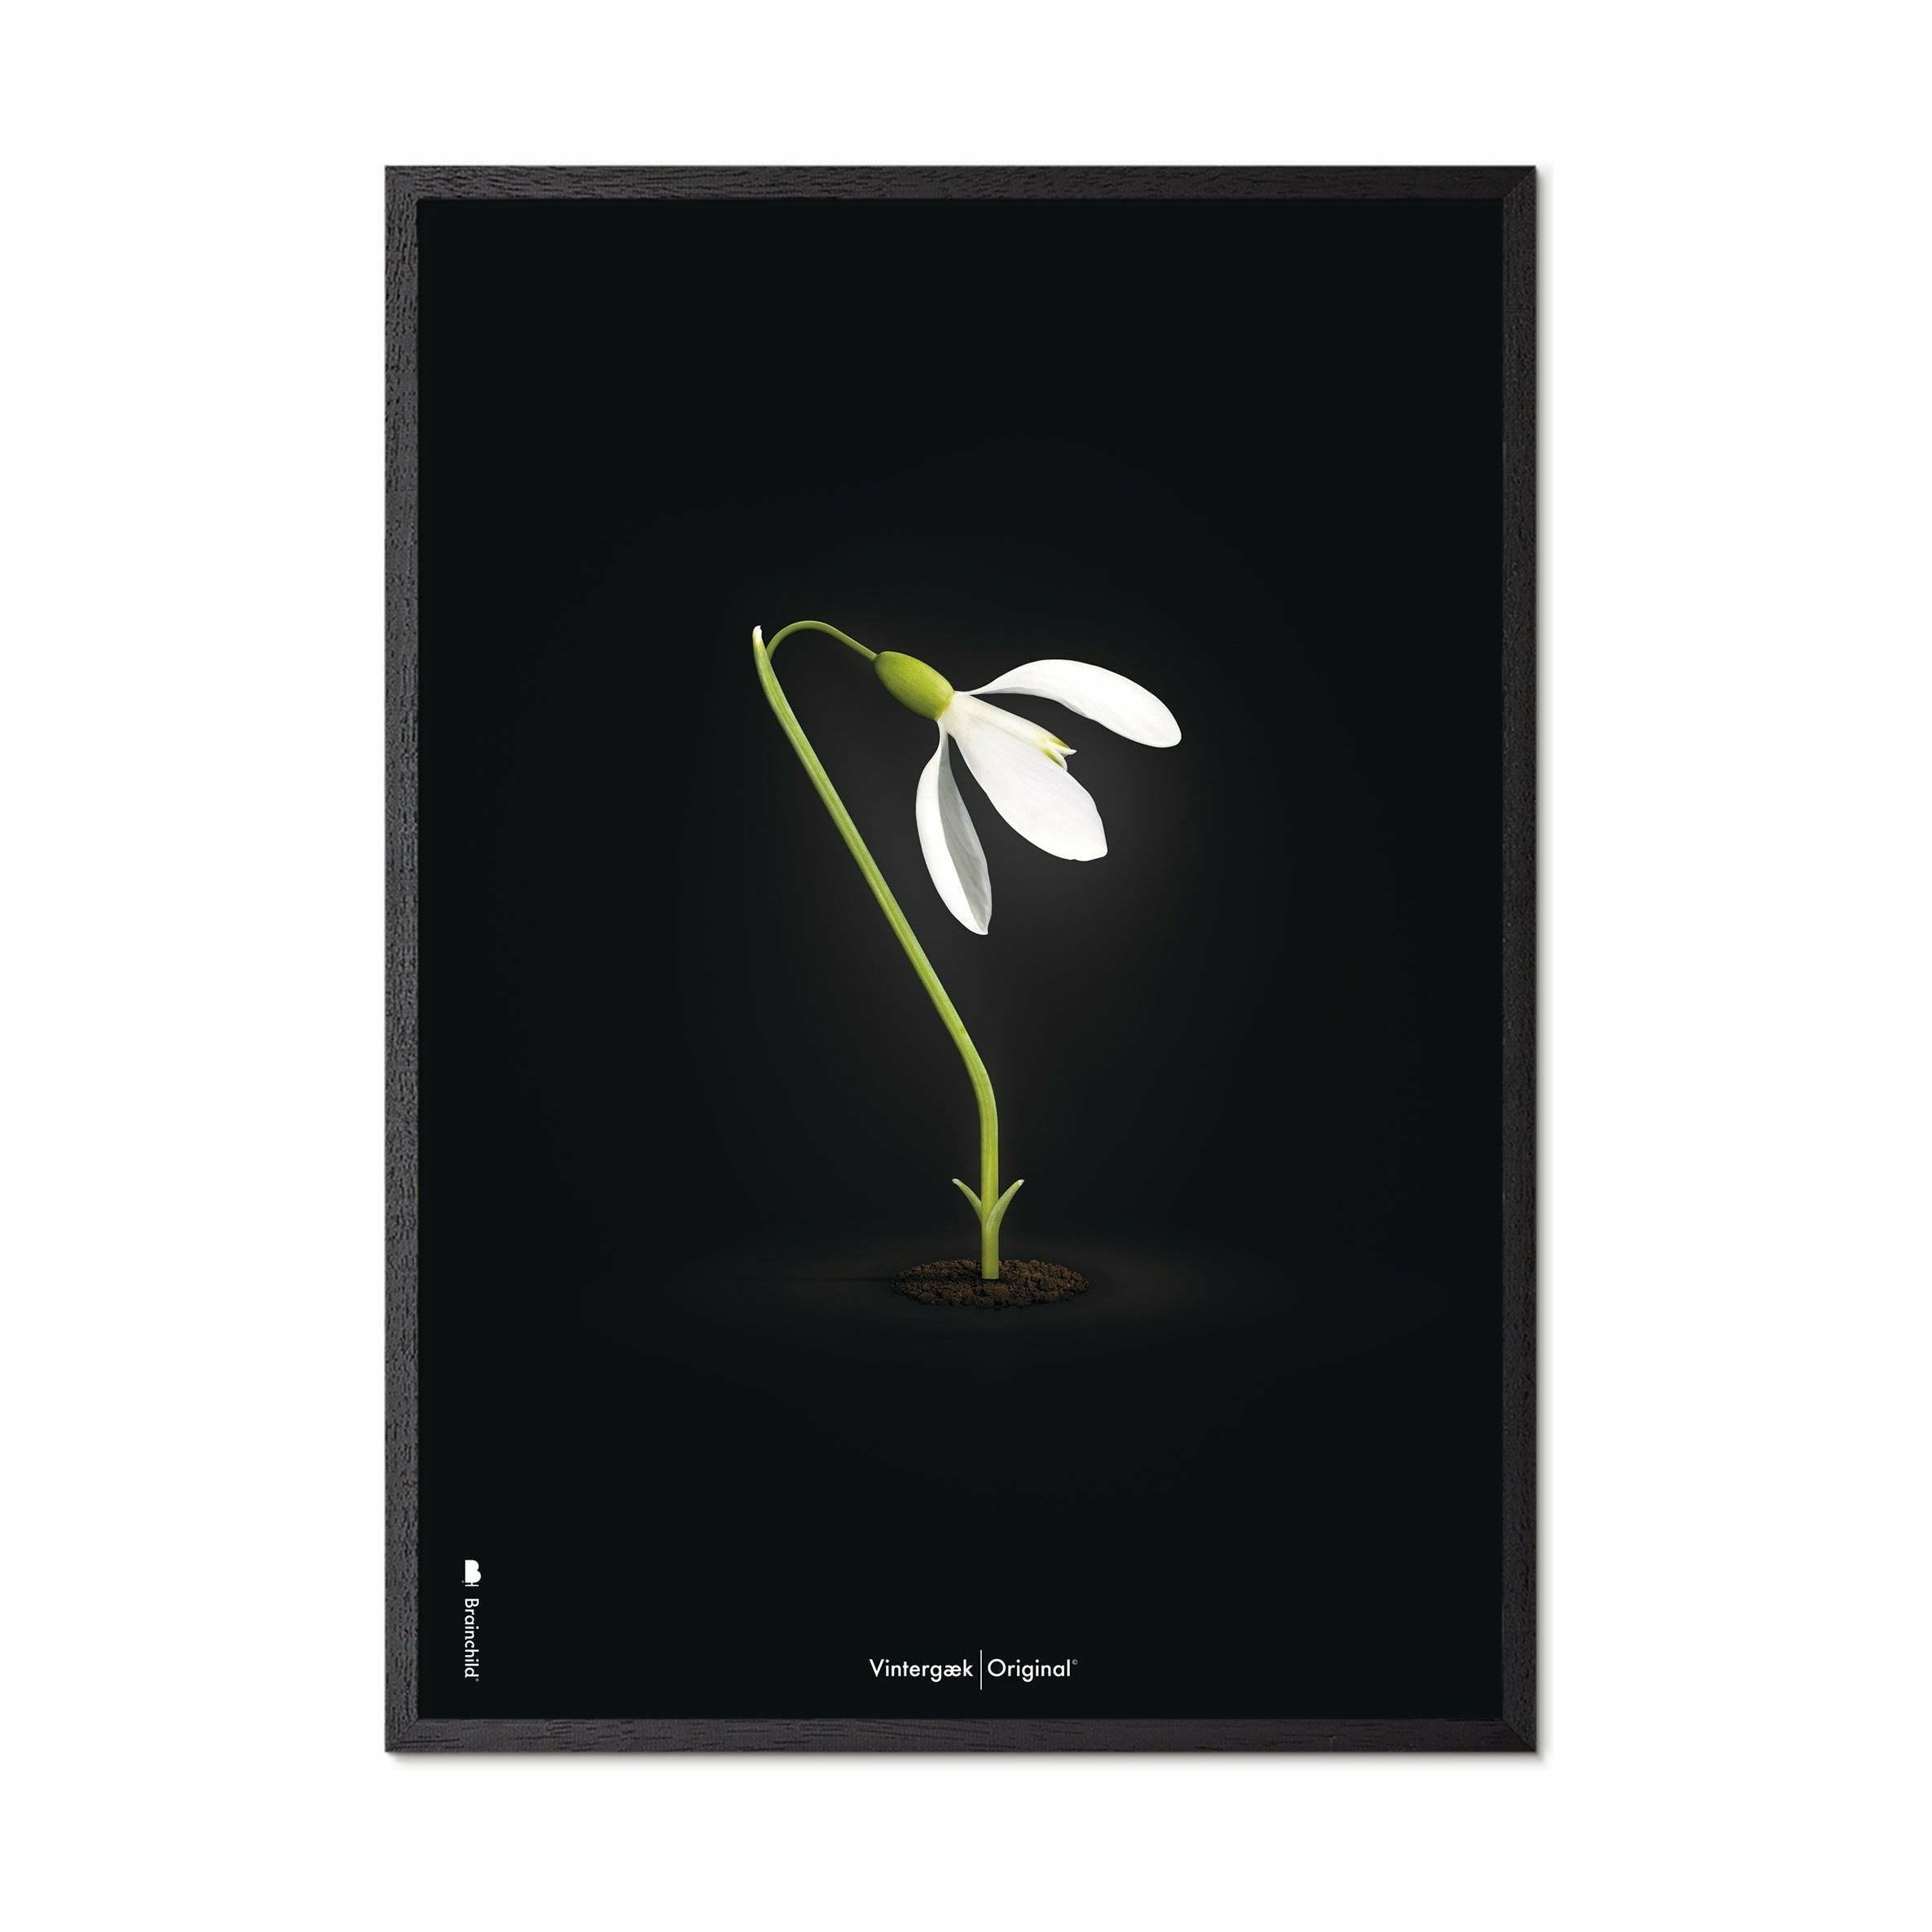 Brainchild Snowdrop Classic Poster, Frame In Black Lacquered Wood 30x40 Cm, Black Background